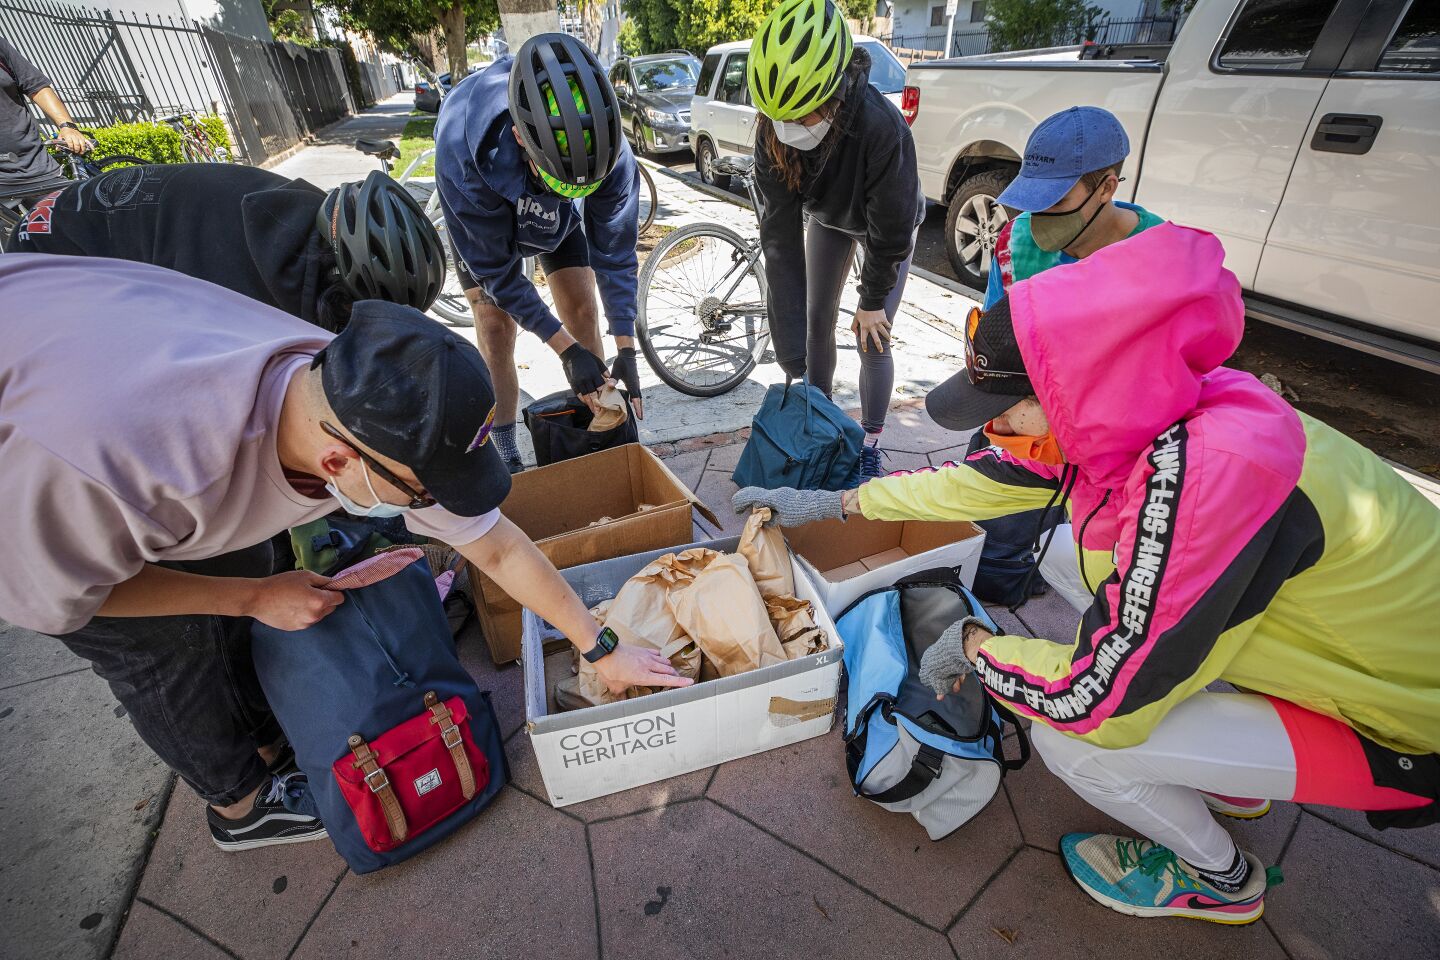 Bicycle Meals volunteers load up their backpacks with bags of food before heading out to deliver to the homeless around Koreatown.